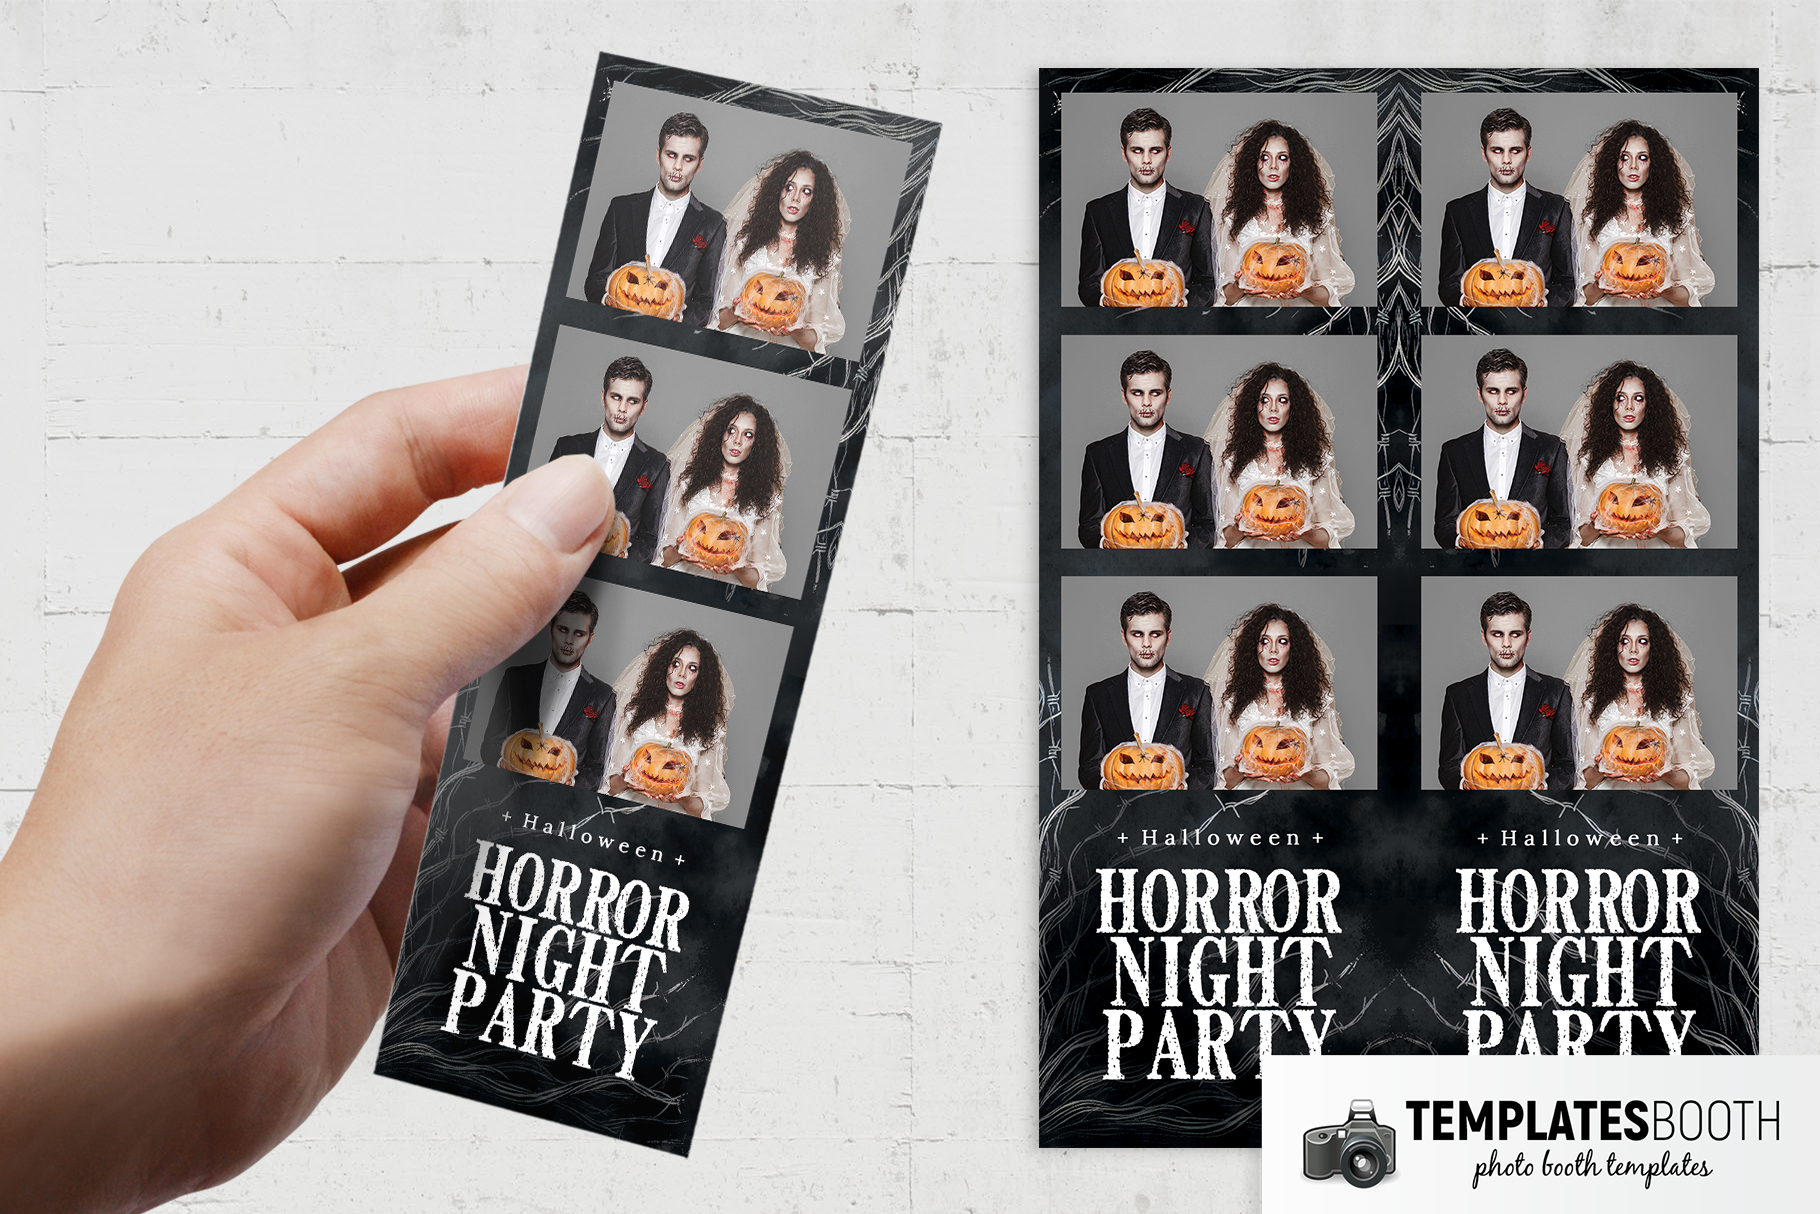 Horror Night Party Photo Booth Template